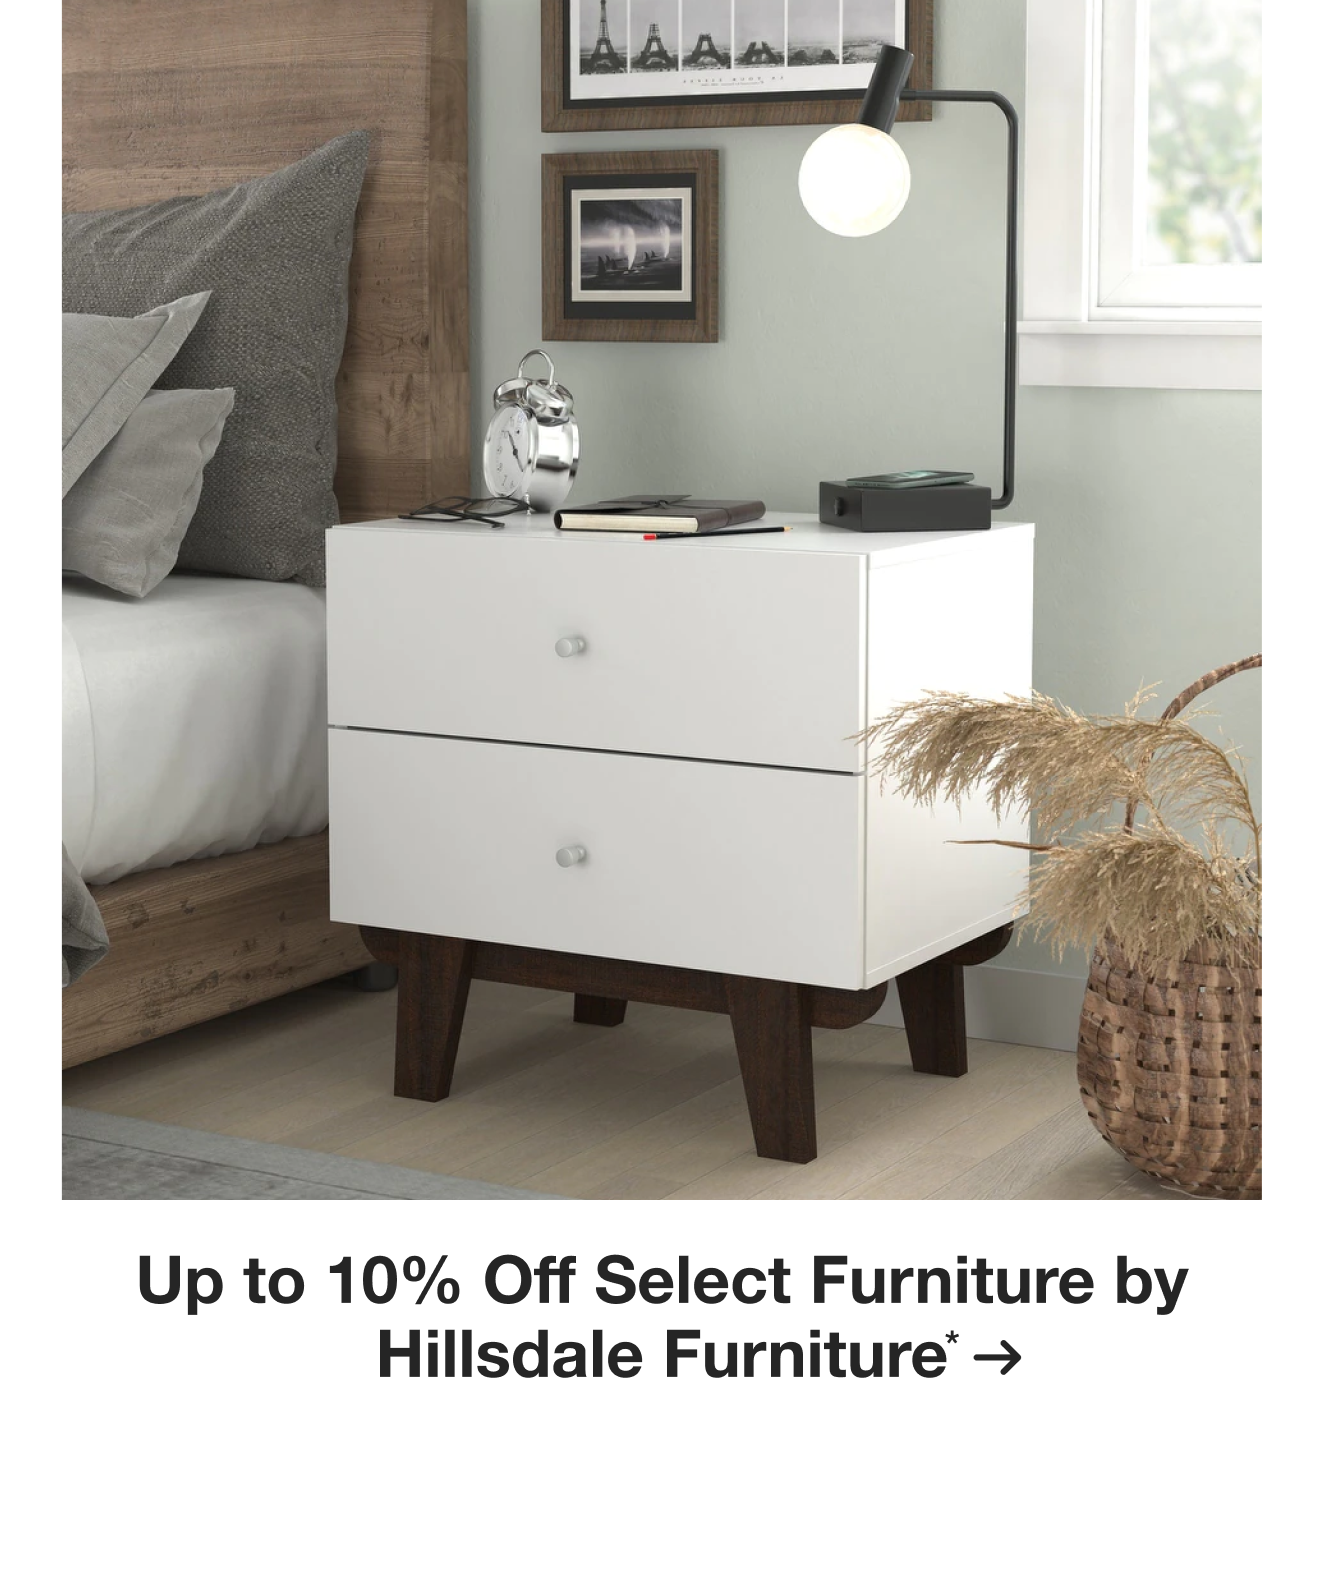 Up to 10% Off Select Furniture by Hillsdale*